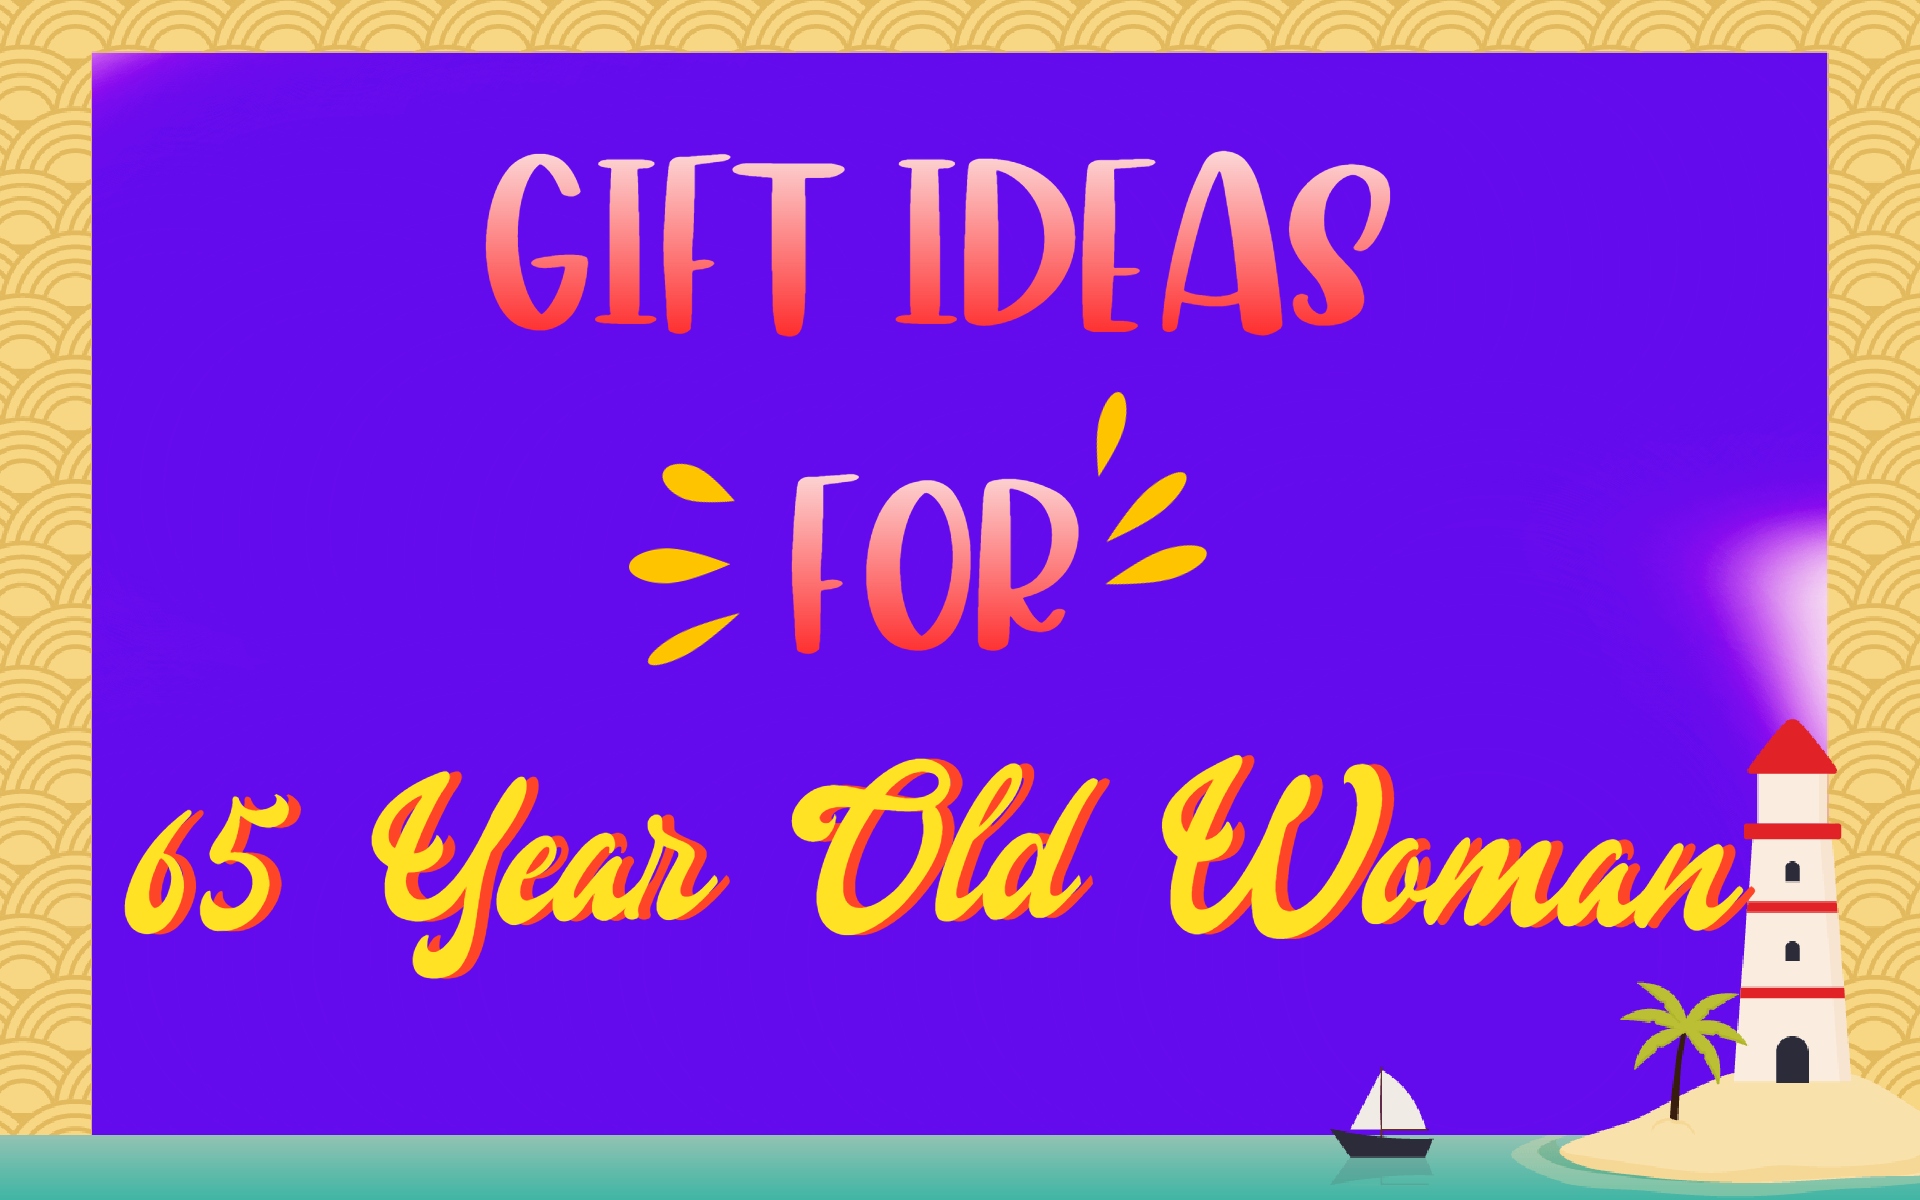 Cover image of gift ideas for 65-year-old woman by Giftsedge